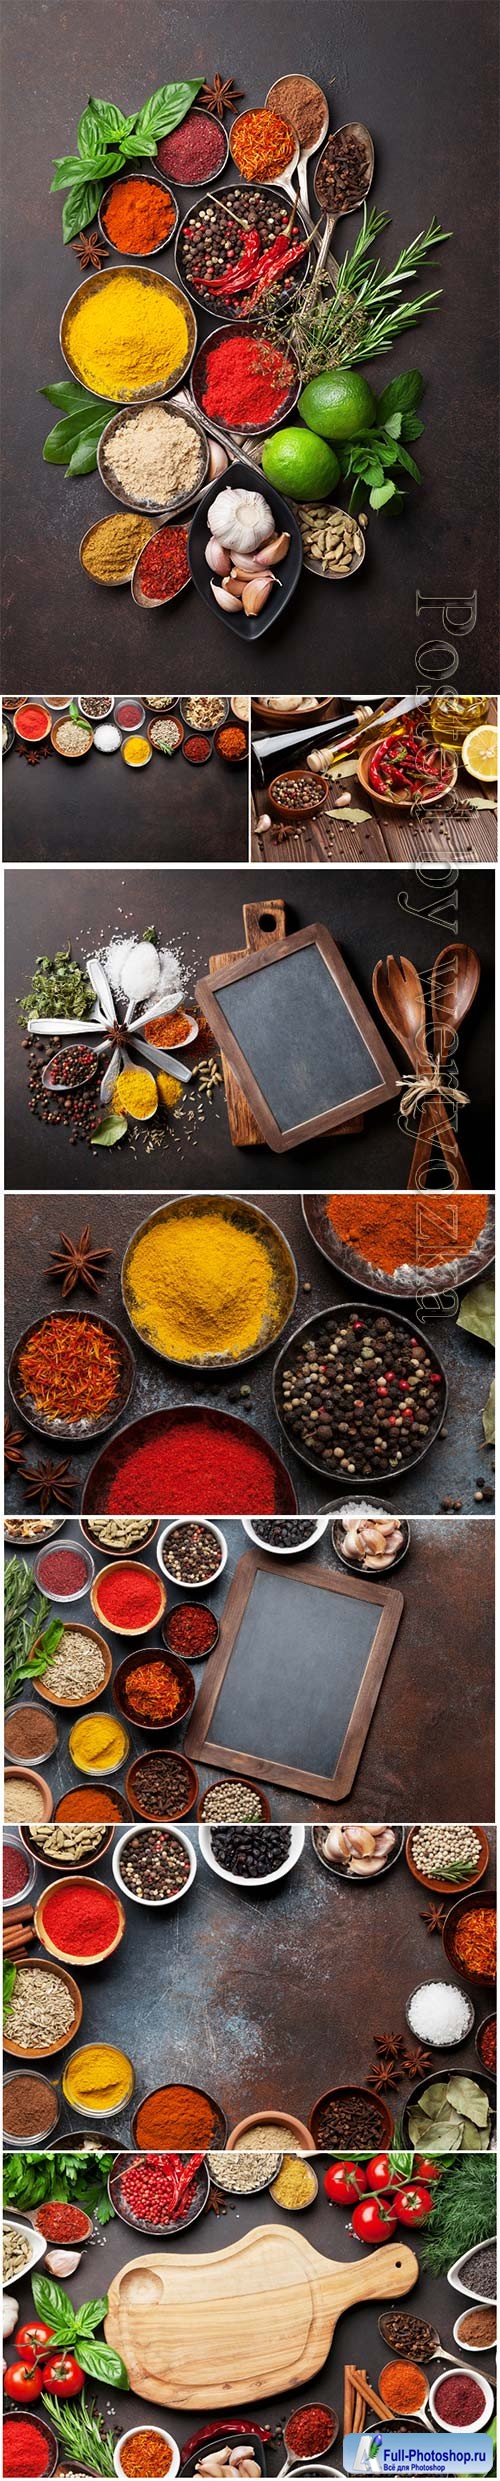 Various spices and herbs beautiful stock photo